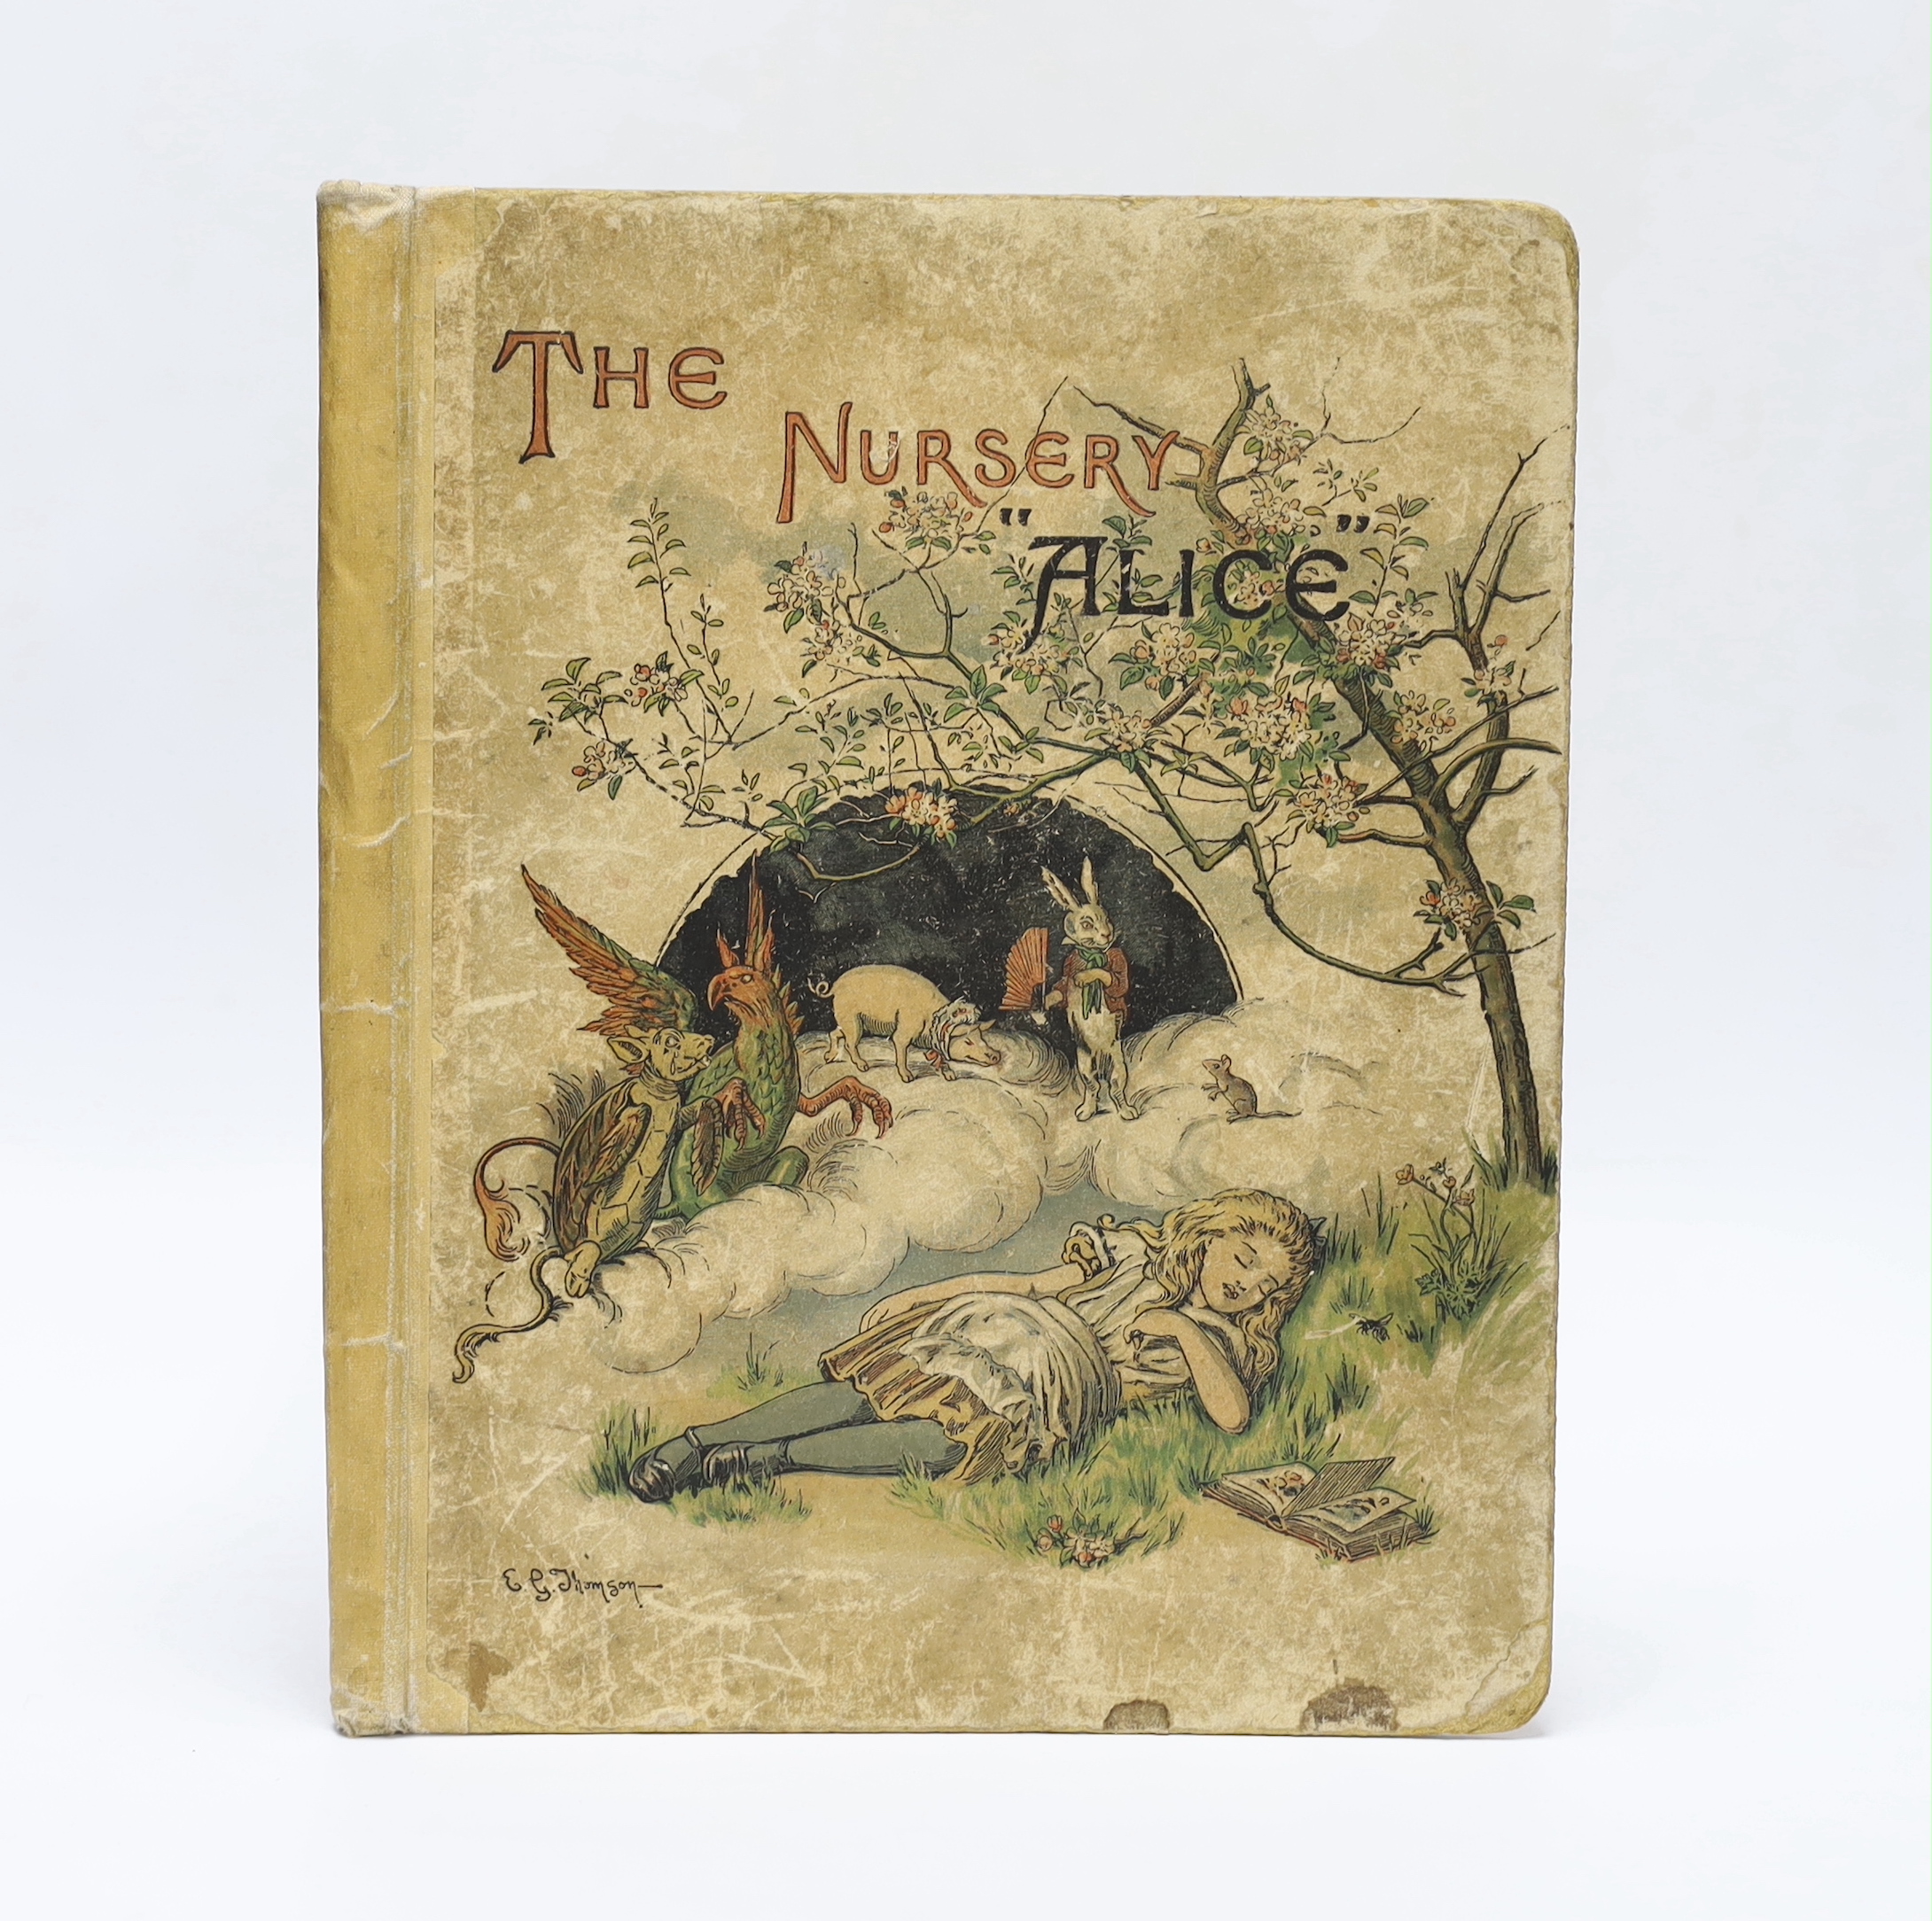 Dodgson, Charles Lutwidge [Carroll, Lewis] - The Nursery ‘’Alice’’: Containing Twenty Coloured Enlargements from Tenniel’s Illustrations to ‘’Alice’s Adventures in Wonderland’’ with Text Adapted to Nursery Rhymes by Lewi